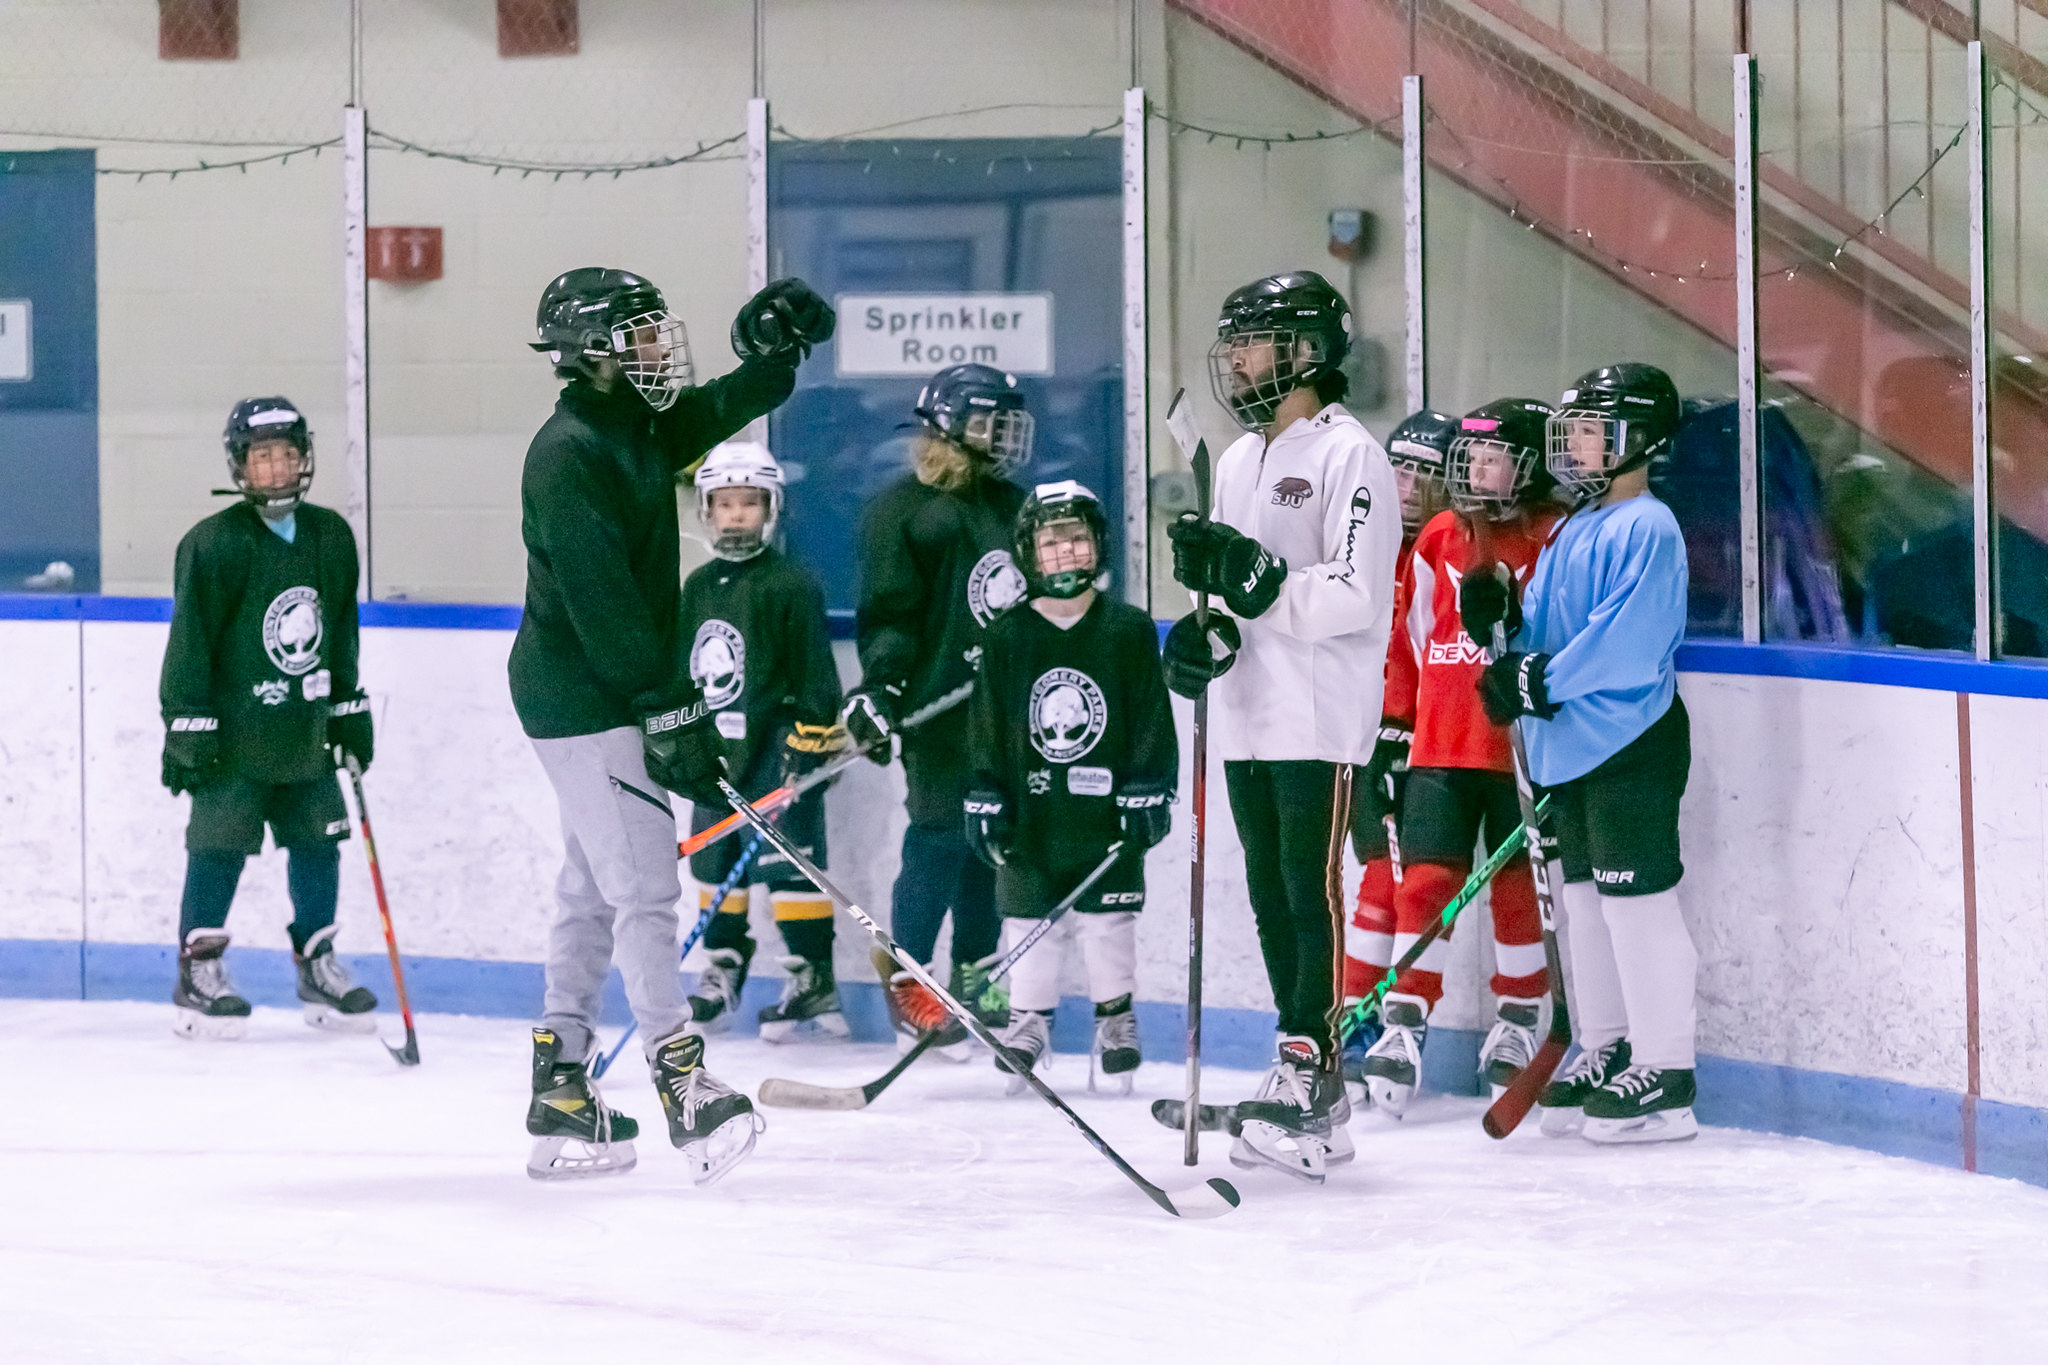 hockey coach giving instruction to players